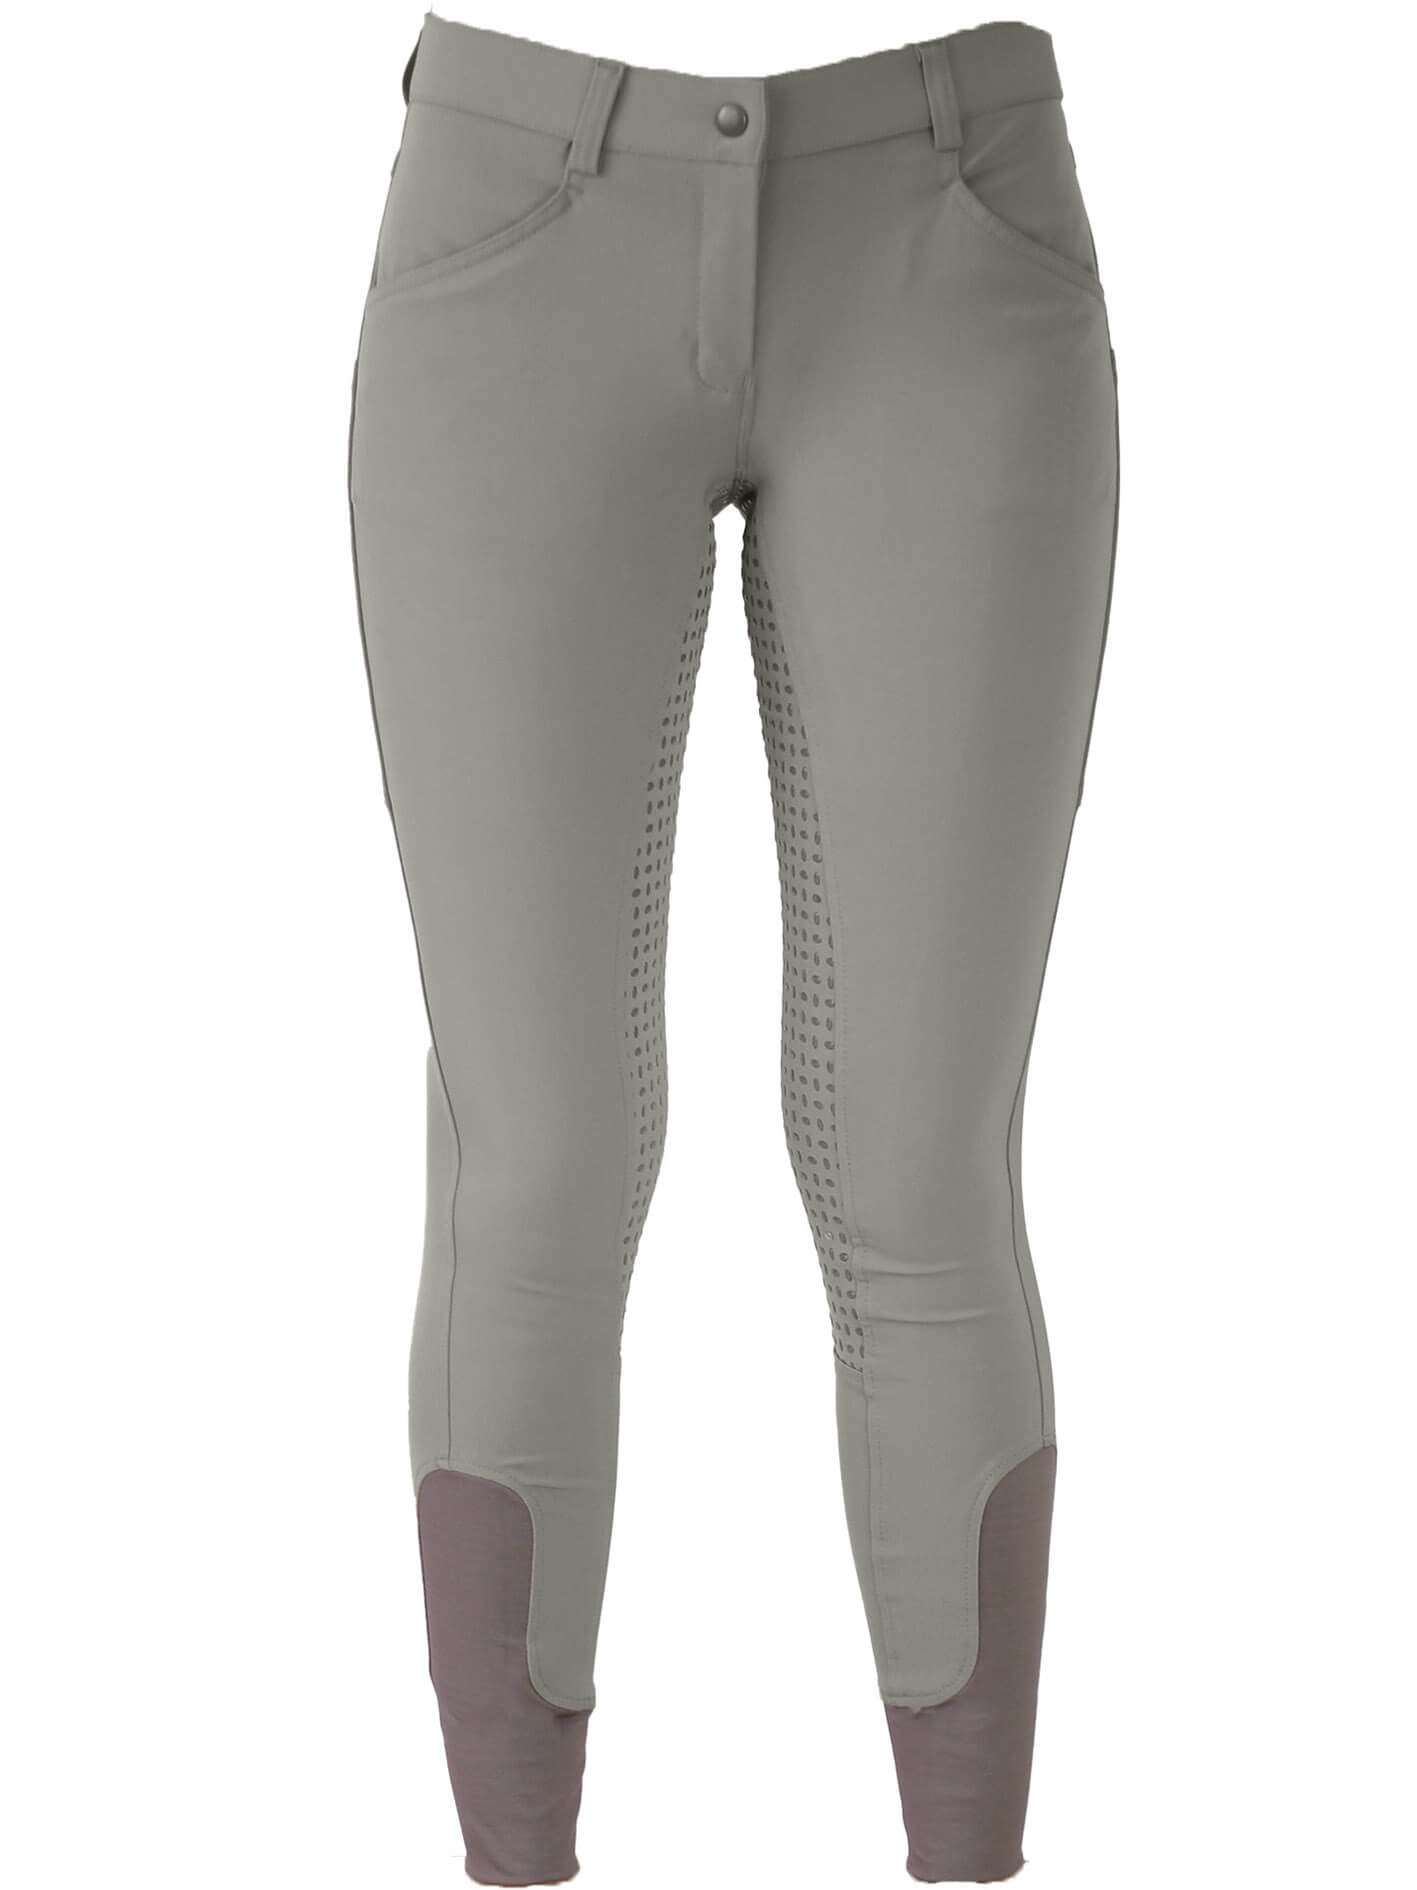 Stay Cool this Summer with Women's Breeches in CoolMax